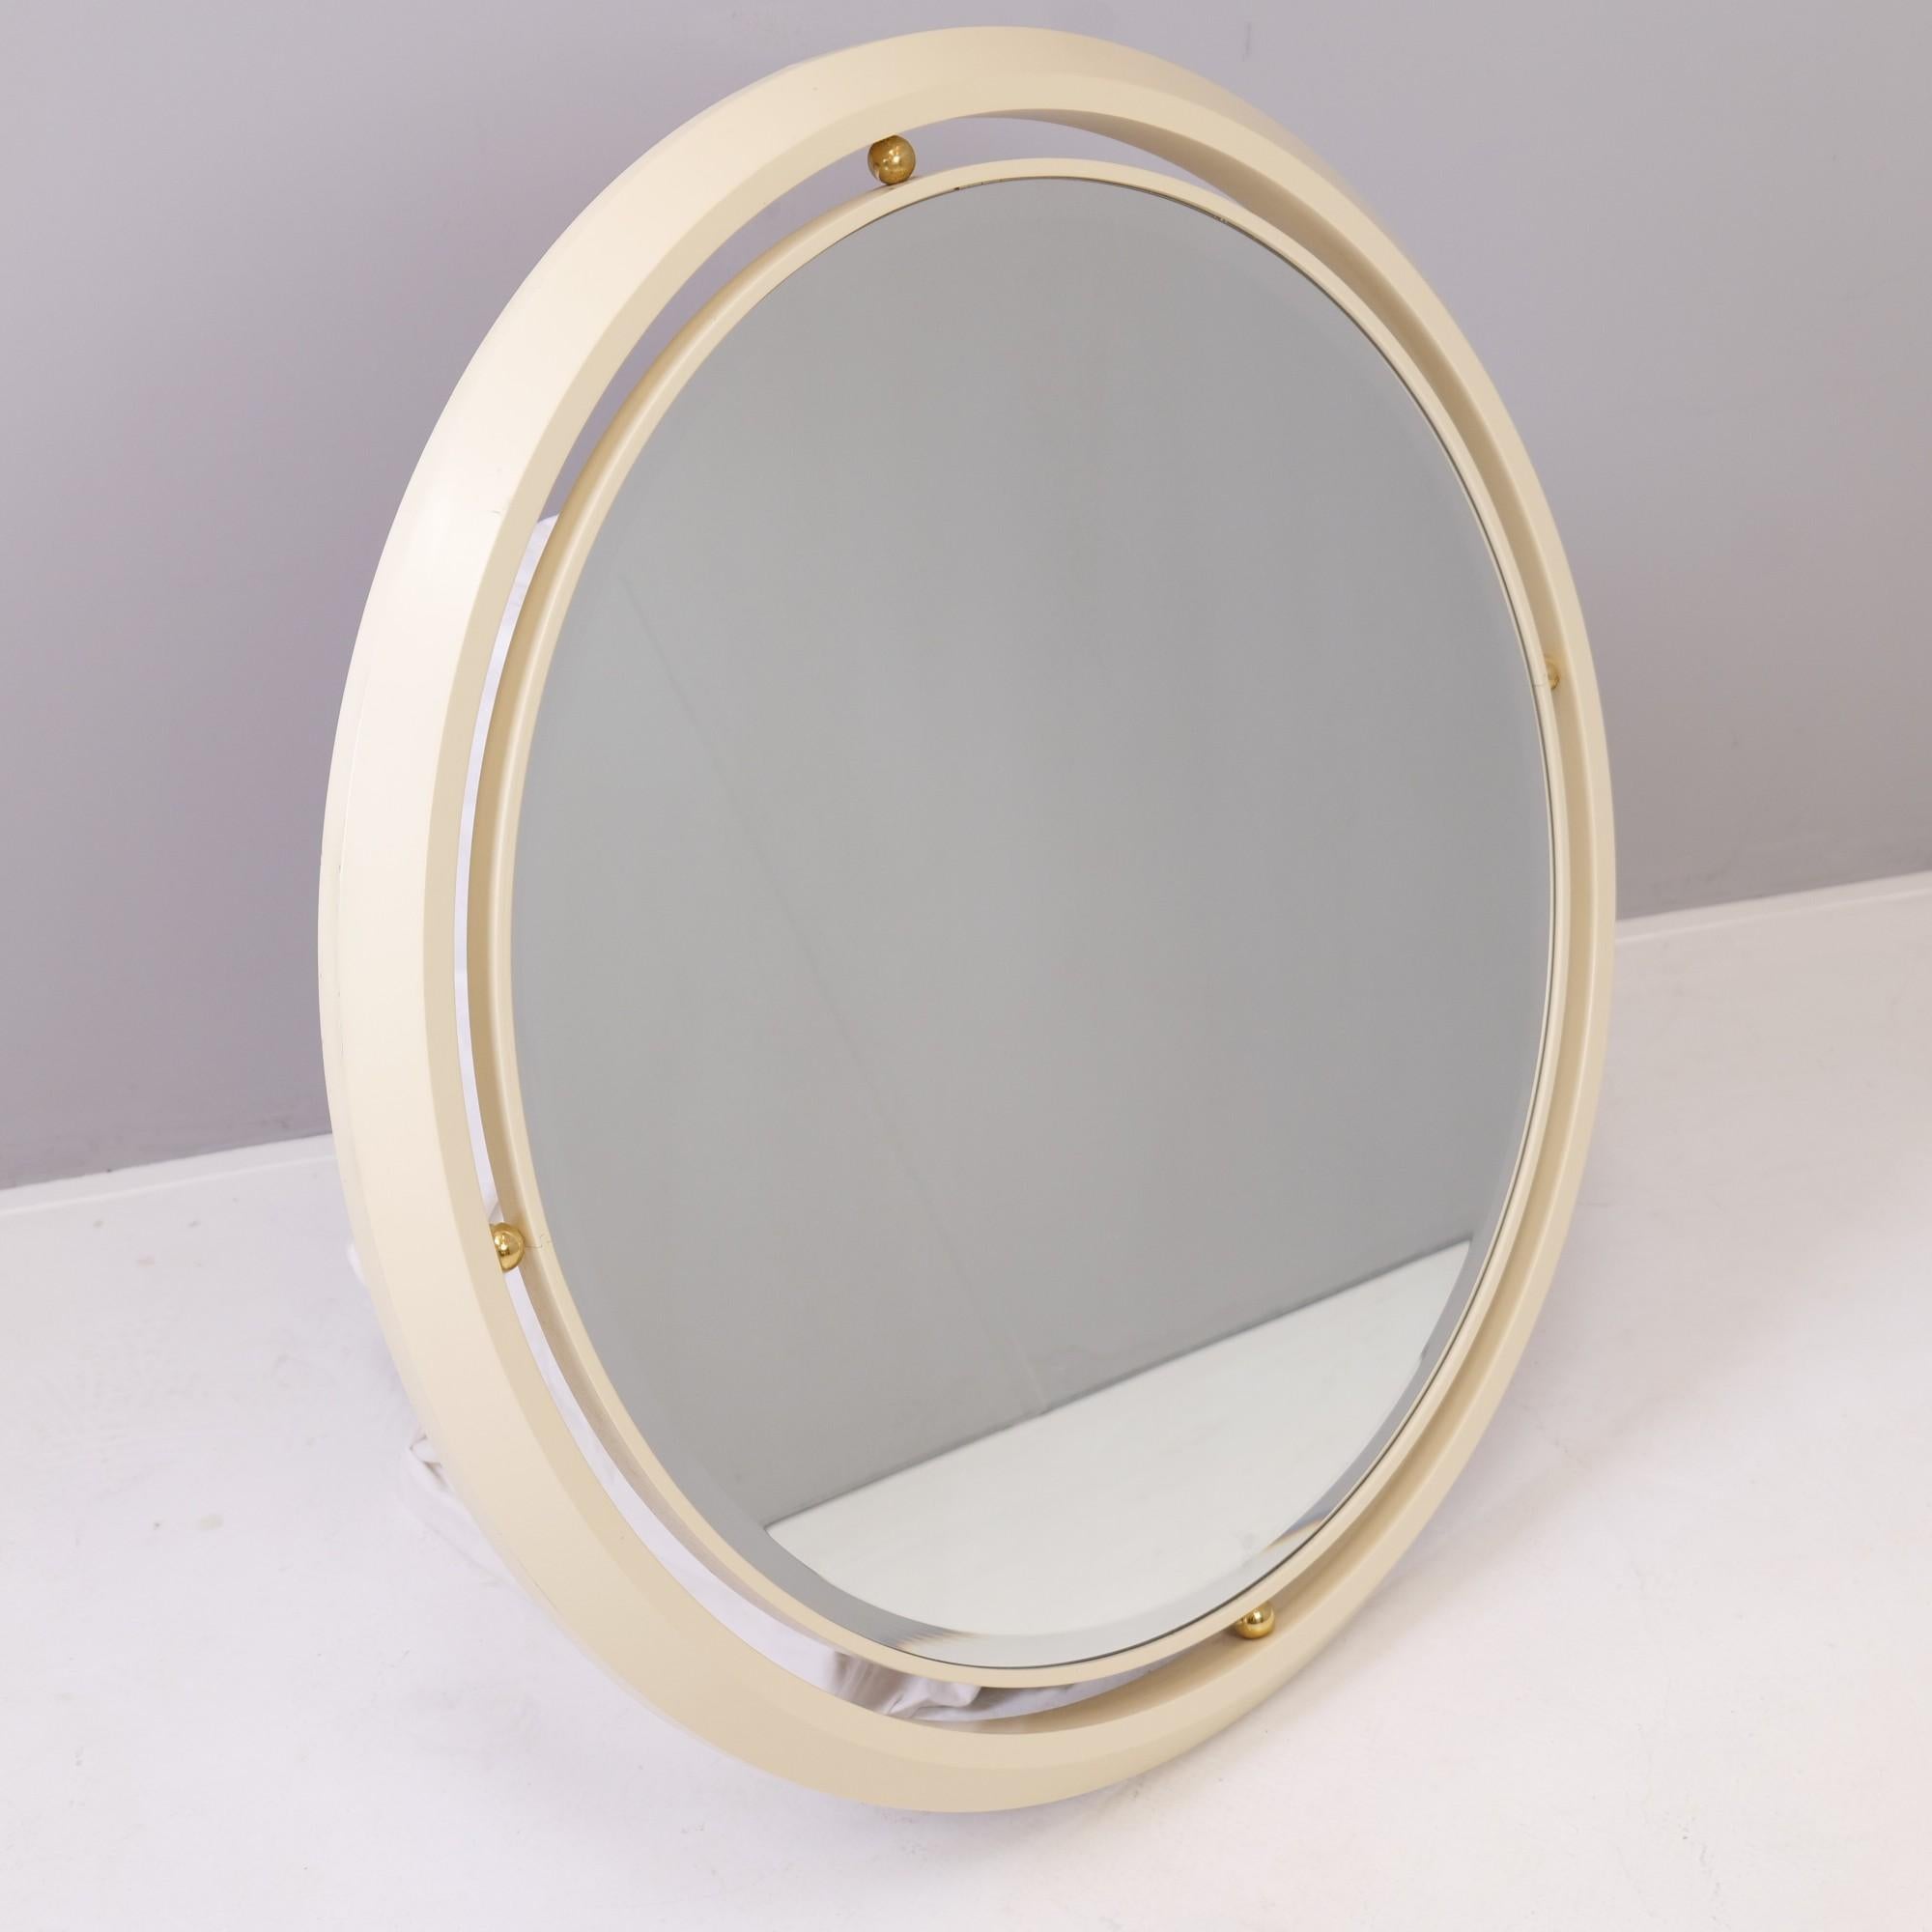 European Vintage Regency Hollywood Mirror in White with Facet Cut For Sale